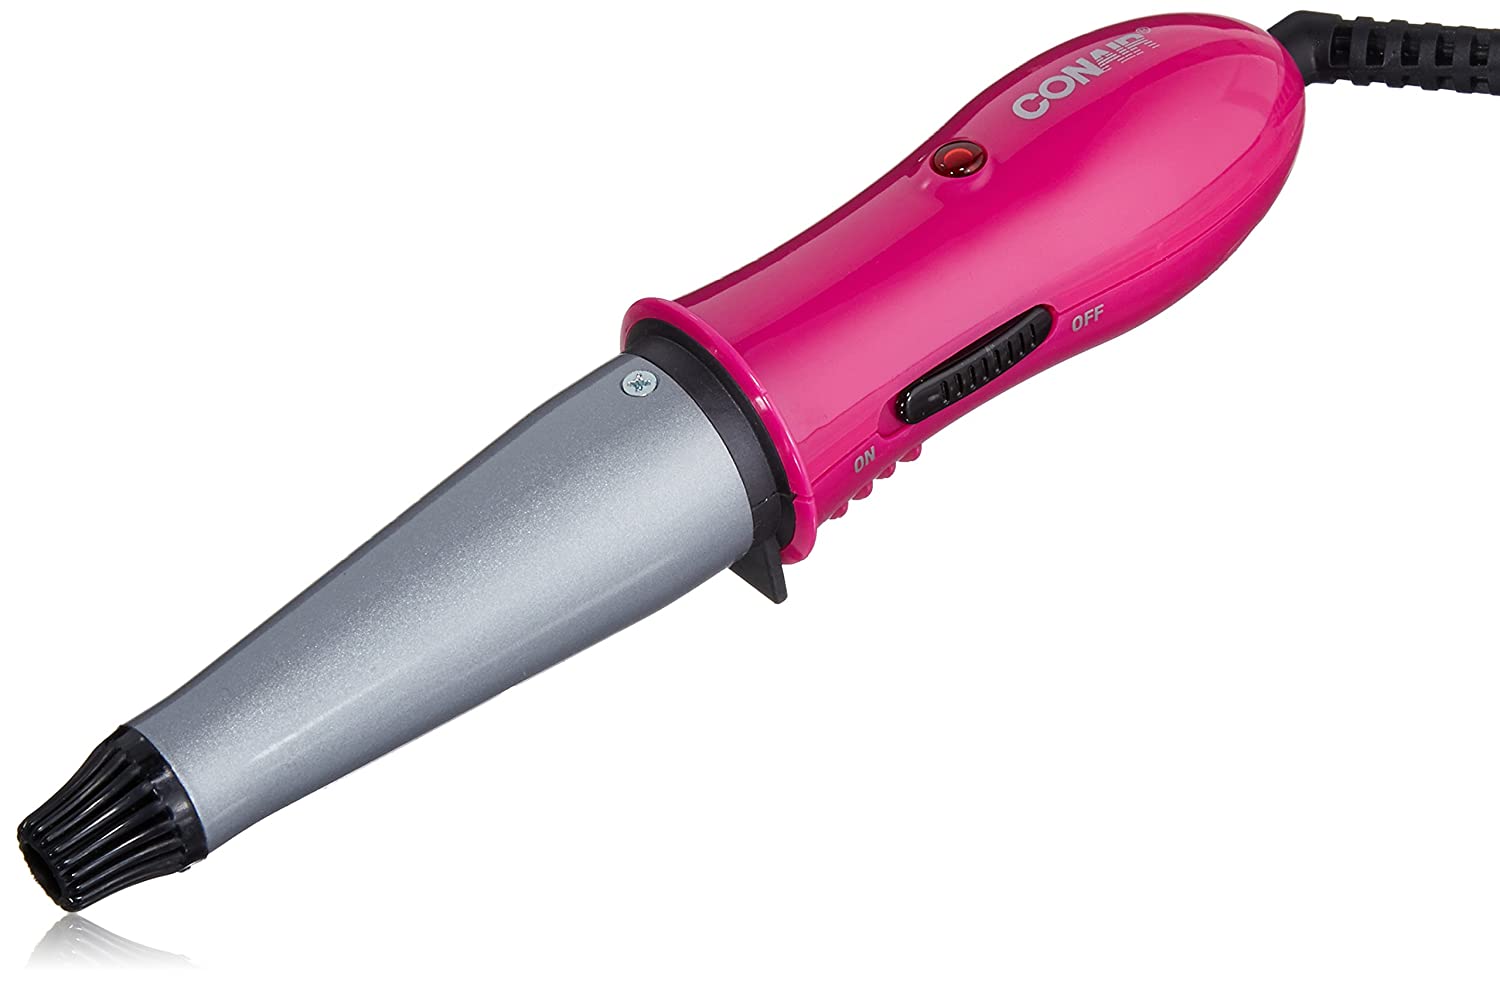 The Conair Infiniti Pro curling iron is affordable and easy to use